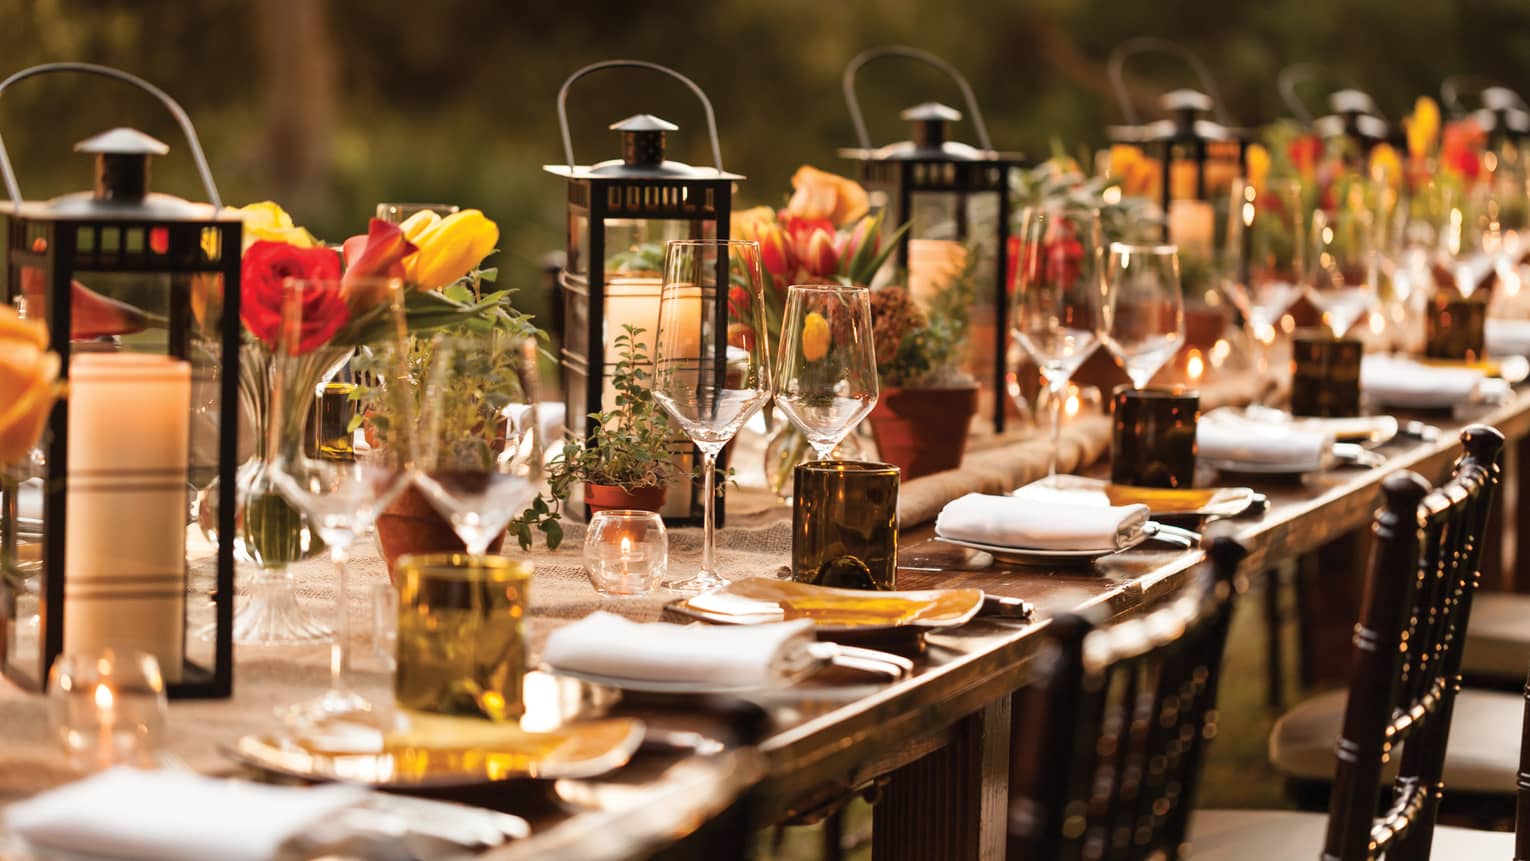 Close-up of long outdoor dining table set with lanterns, candles, wine glasses, flowers